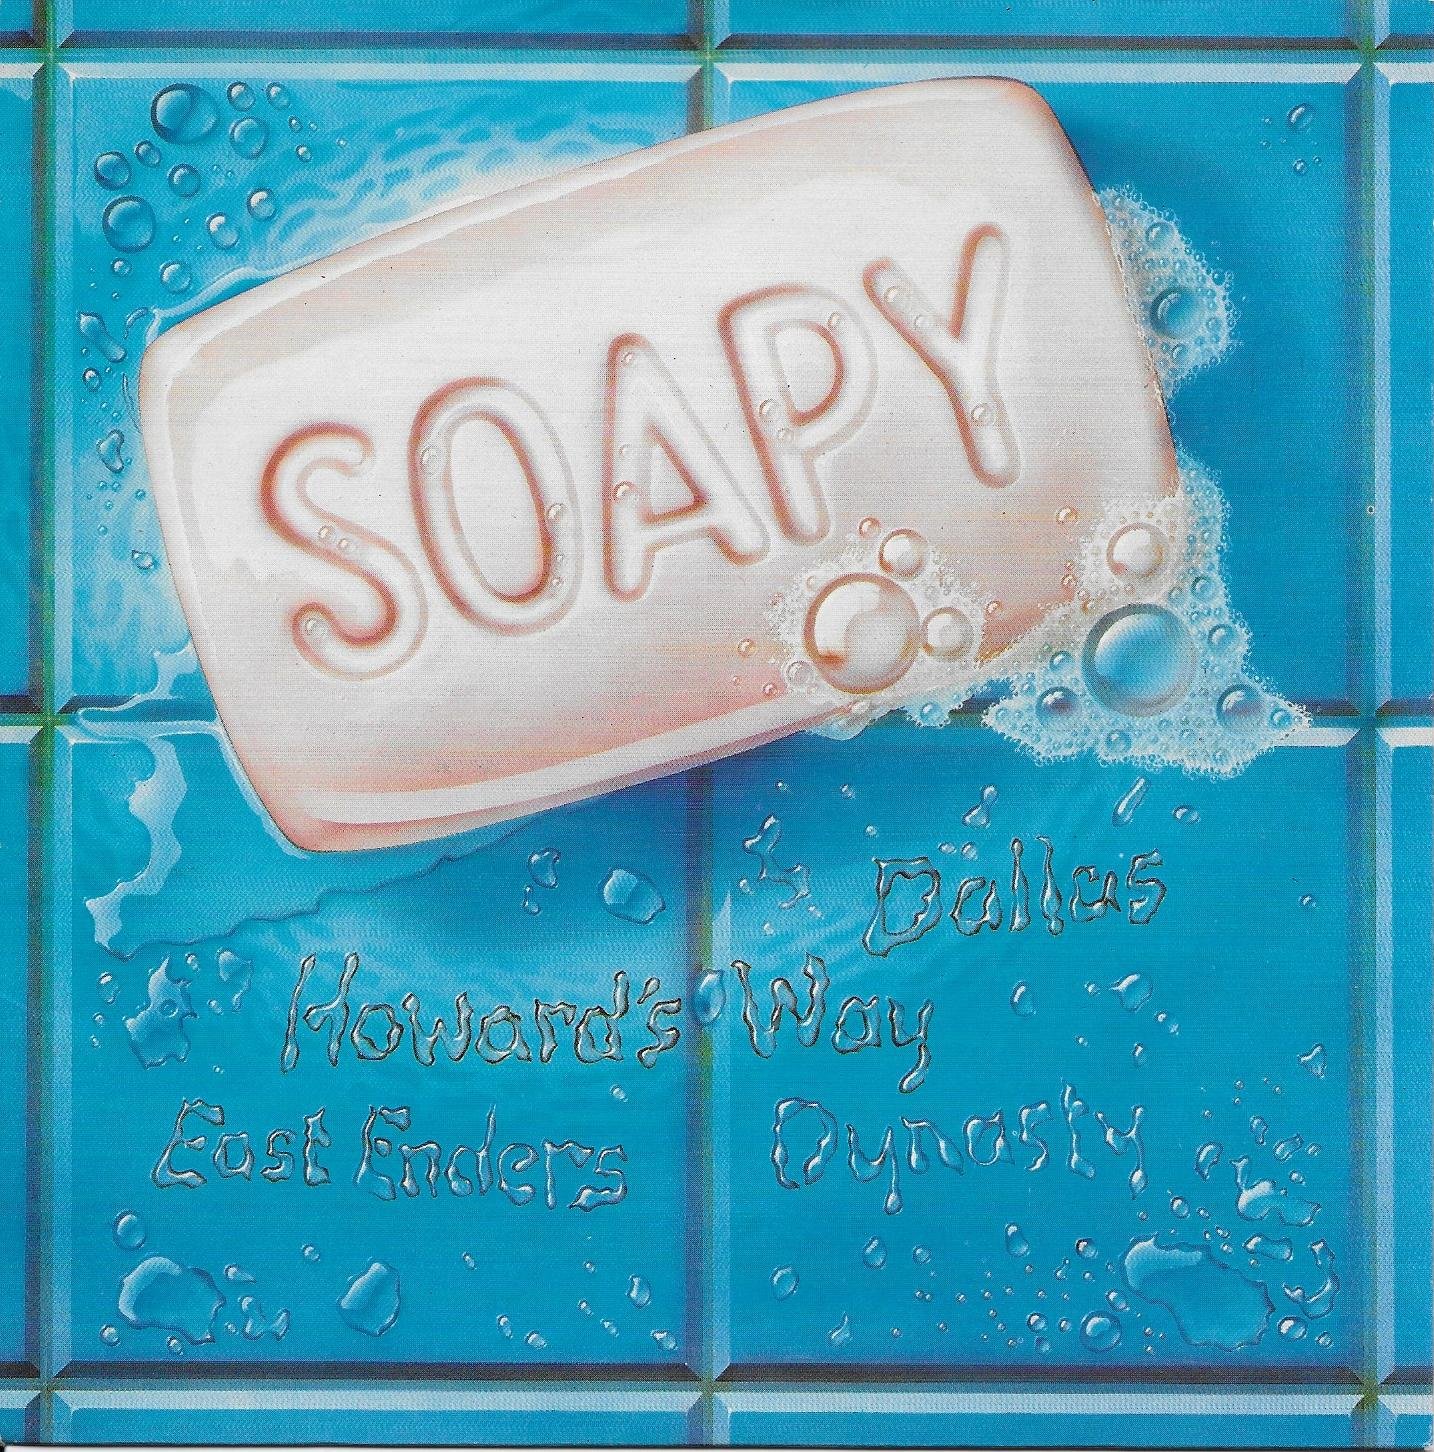 Picture of RESL 206 Soapy by artist Top of the Box from the BBC records and Tapes library